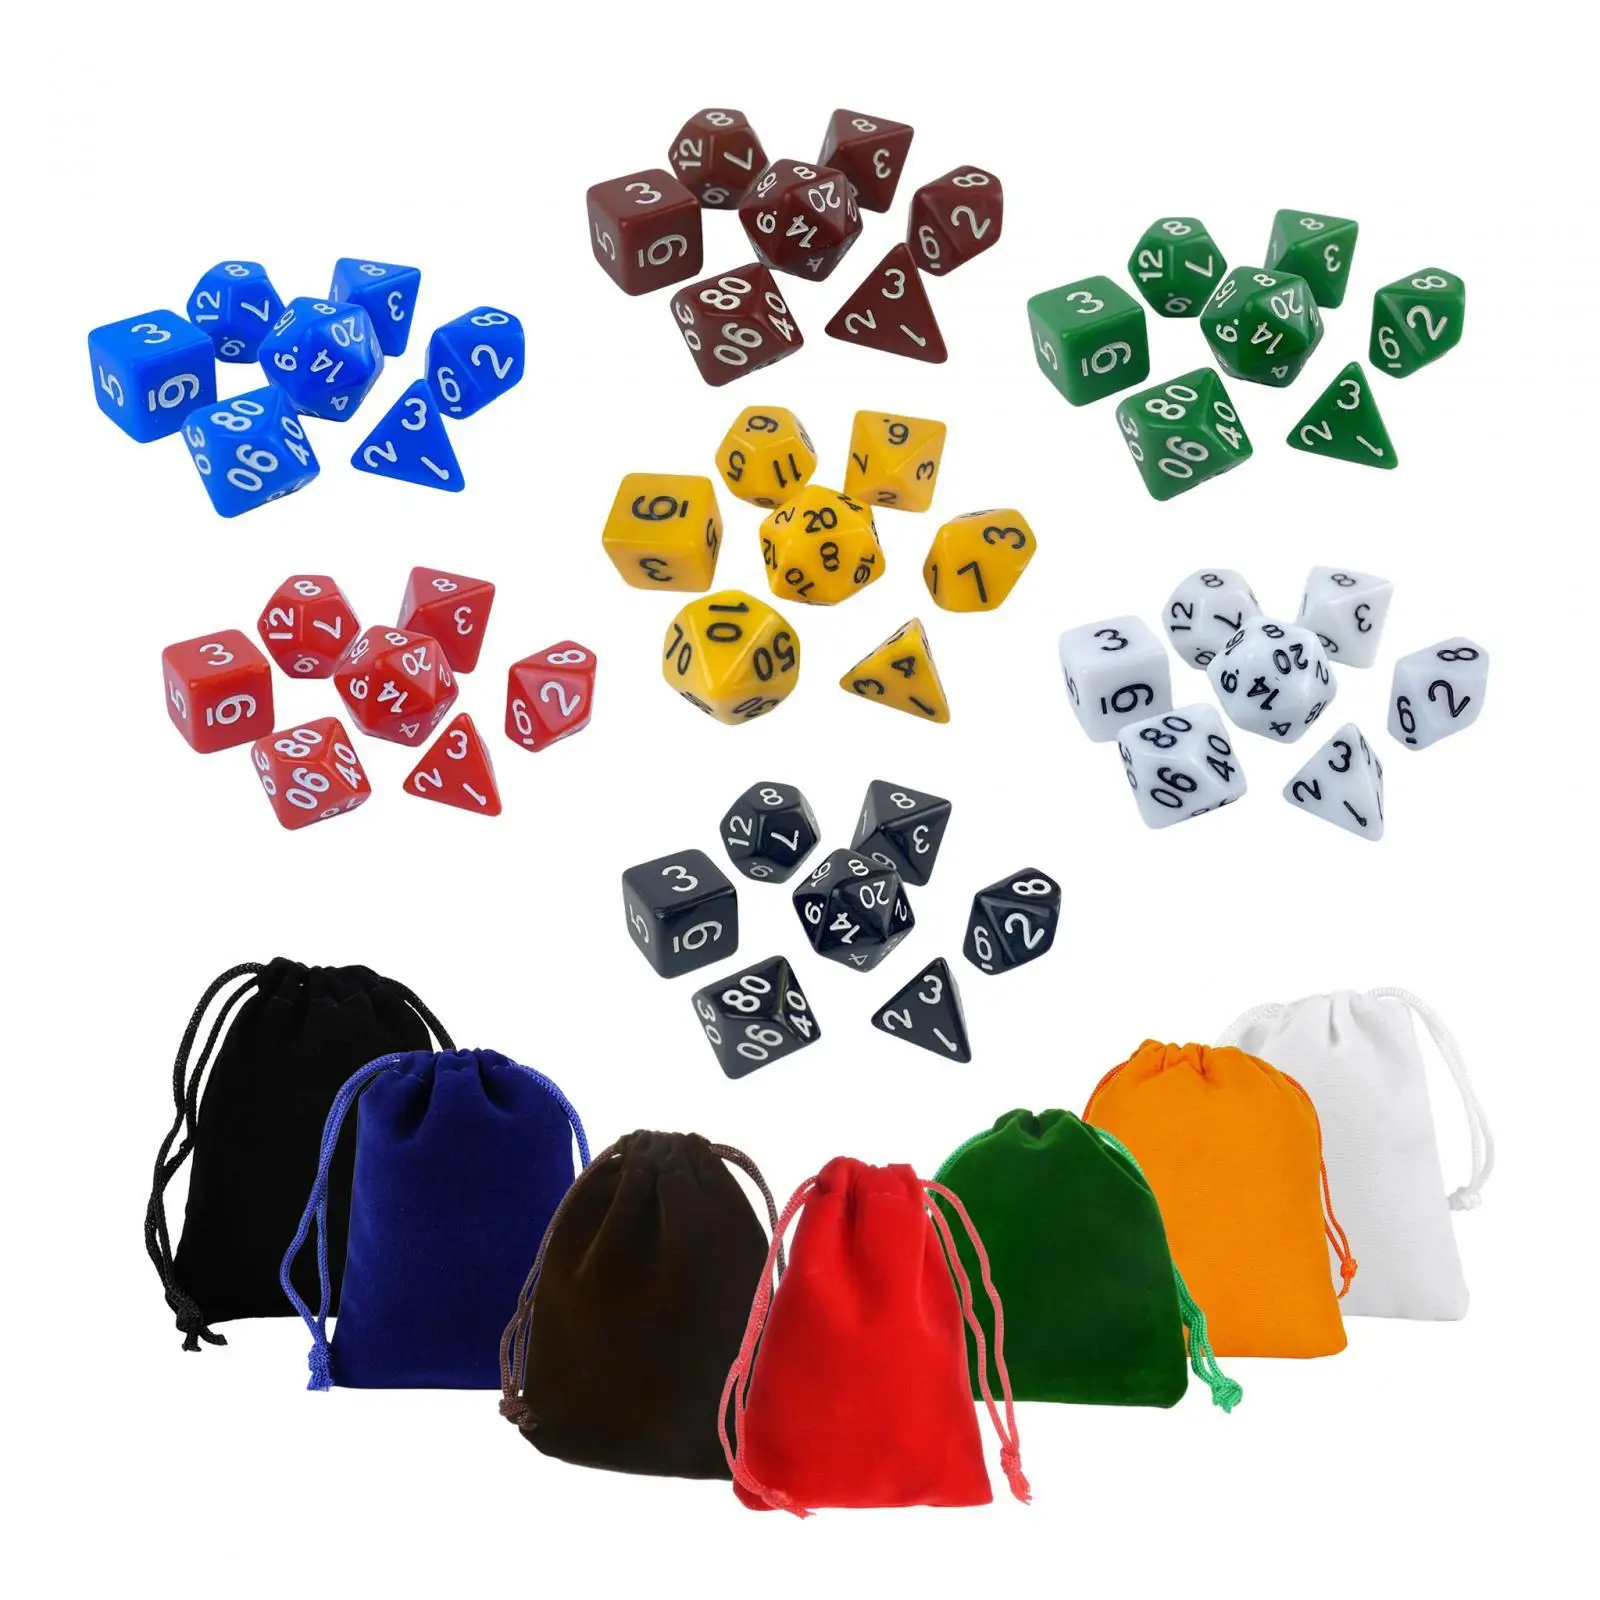 49Pcs Dice Set Math Teaching Toys Acrylic D20 D12 D10 D8 D6 D4 Multi Sided Game Dices for Party KTV Board Game Role Playing Game